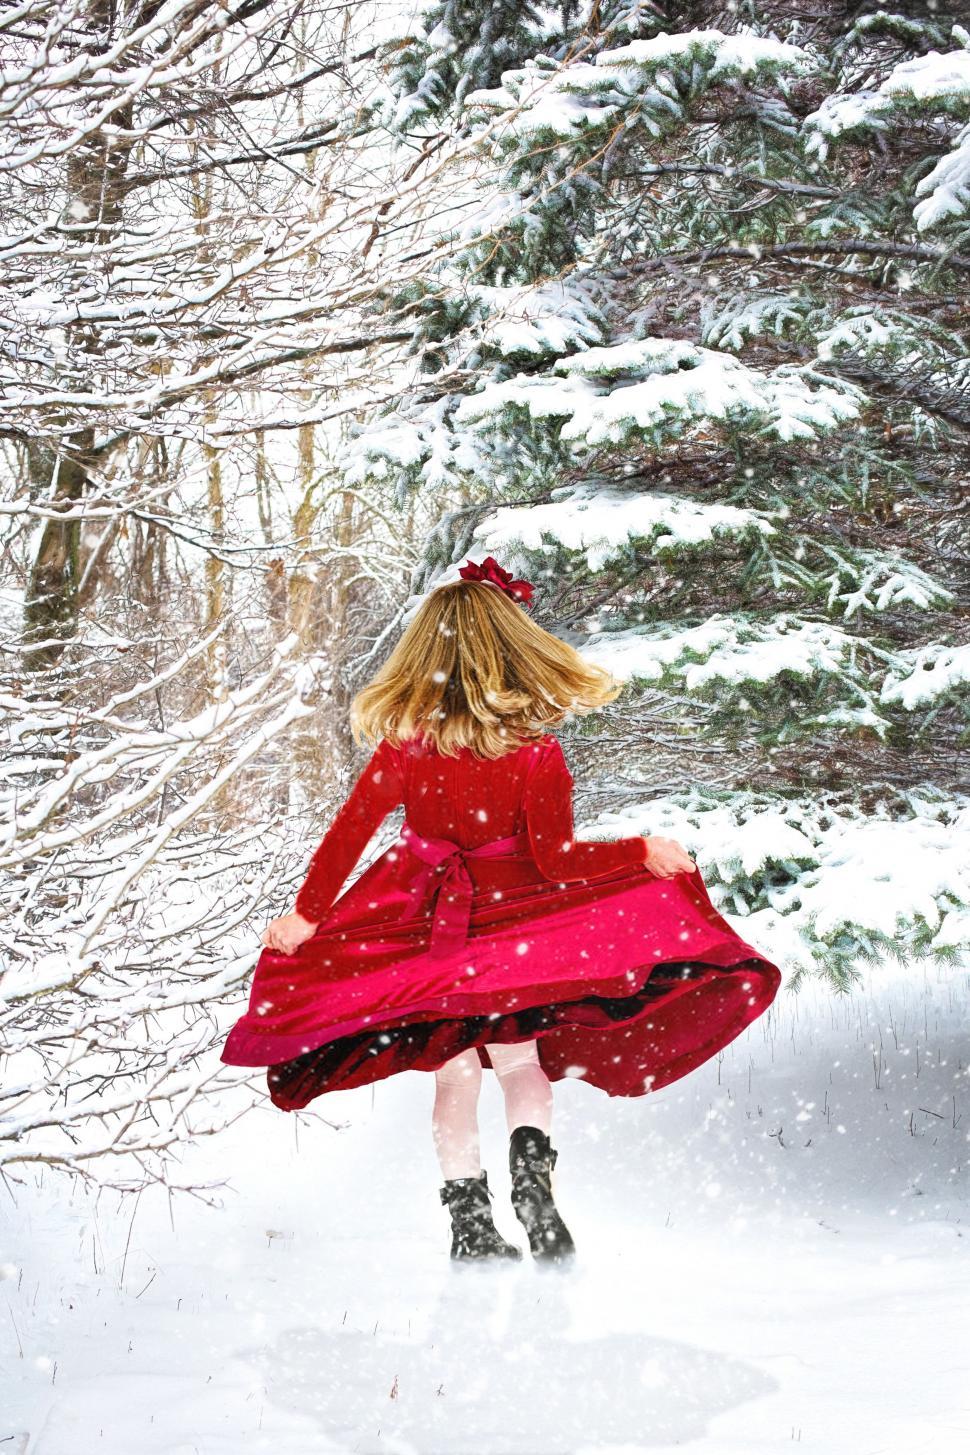 Free Image of Little Girl in Red Christmas Dress and Snow 